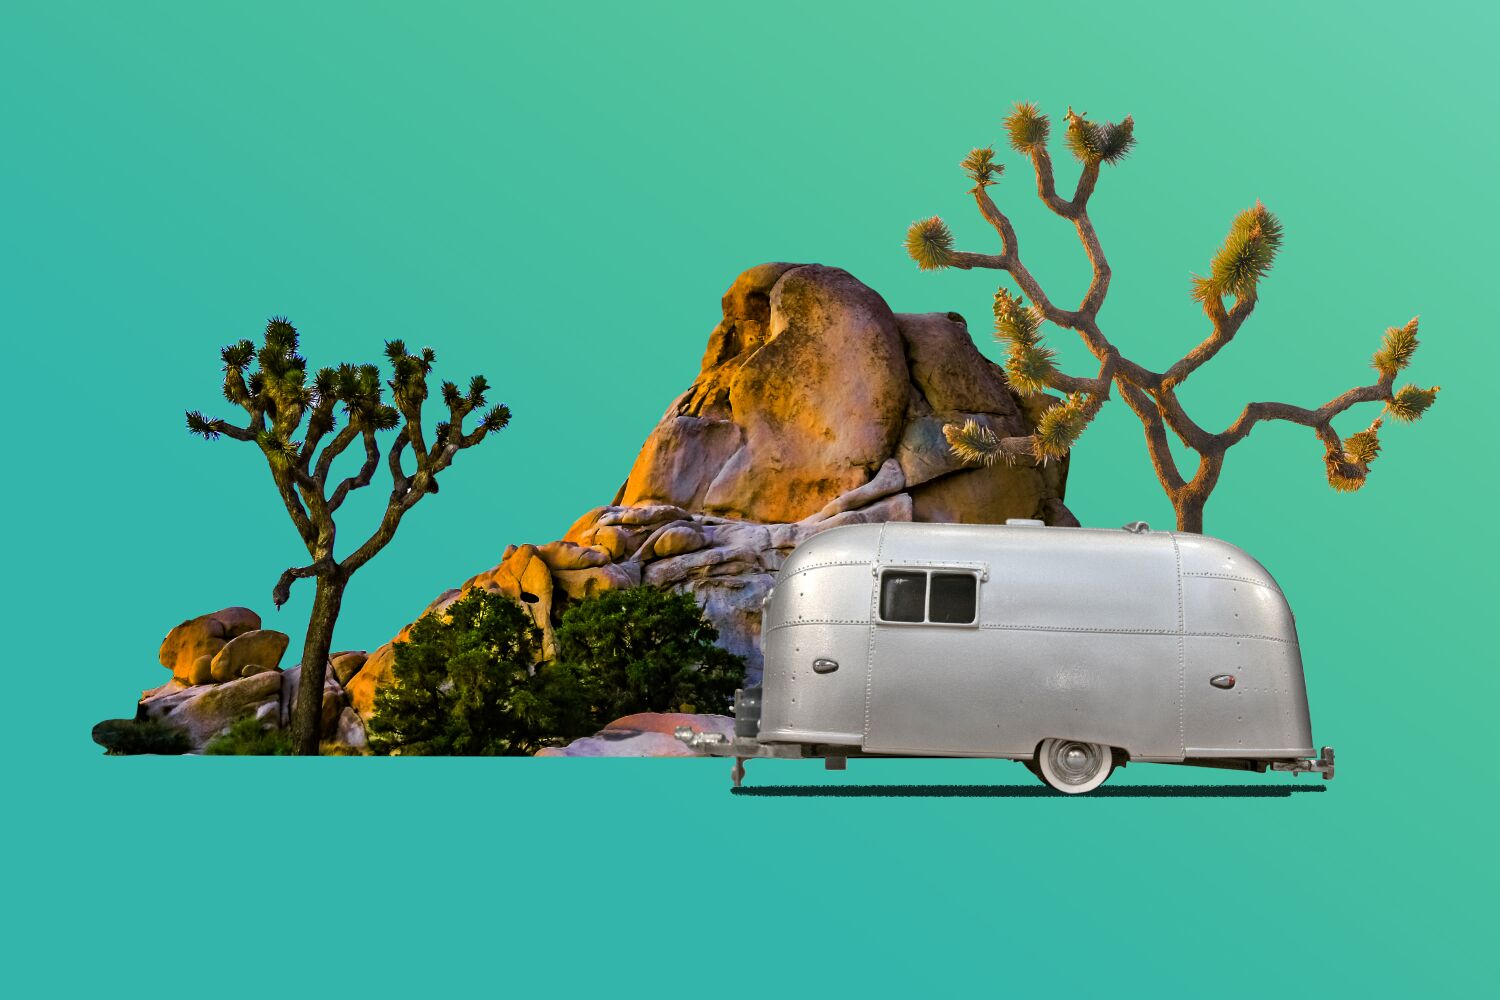 You've camped in Joshua Tree, but never like this. Inside the desert's new Airstream oasis